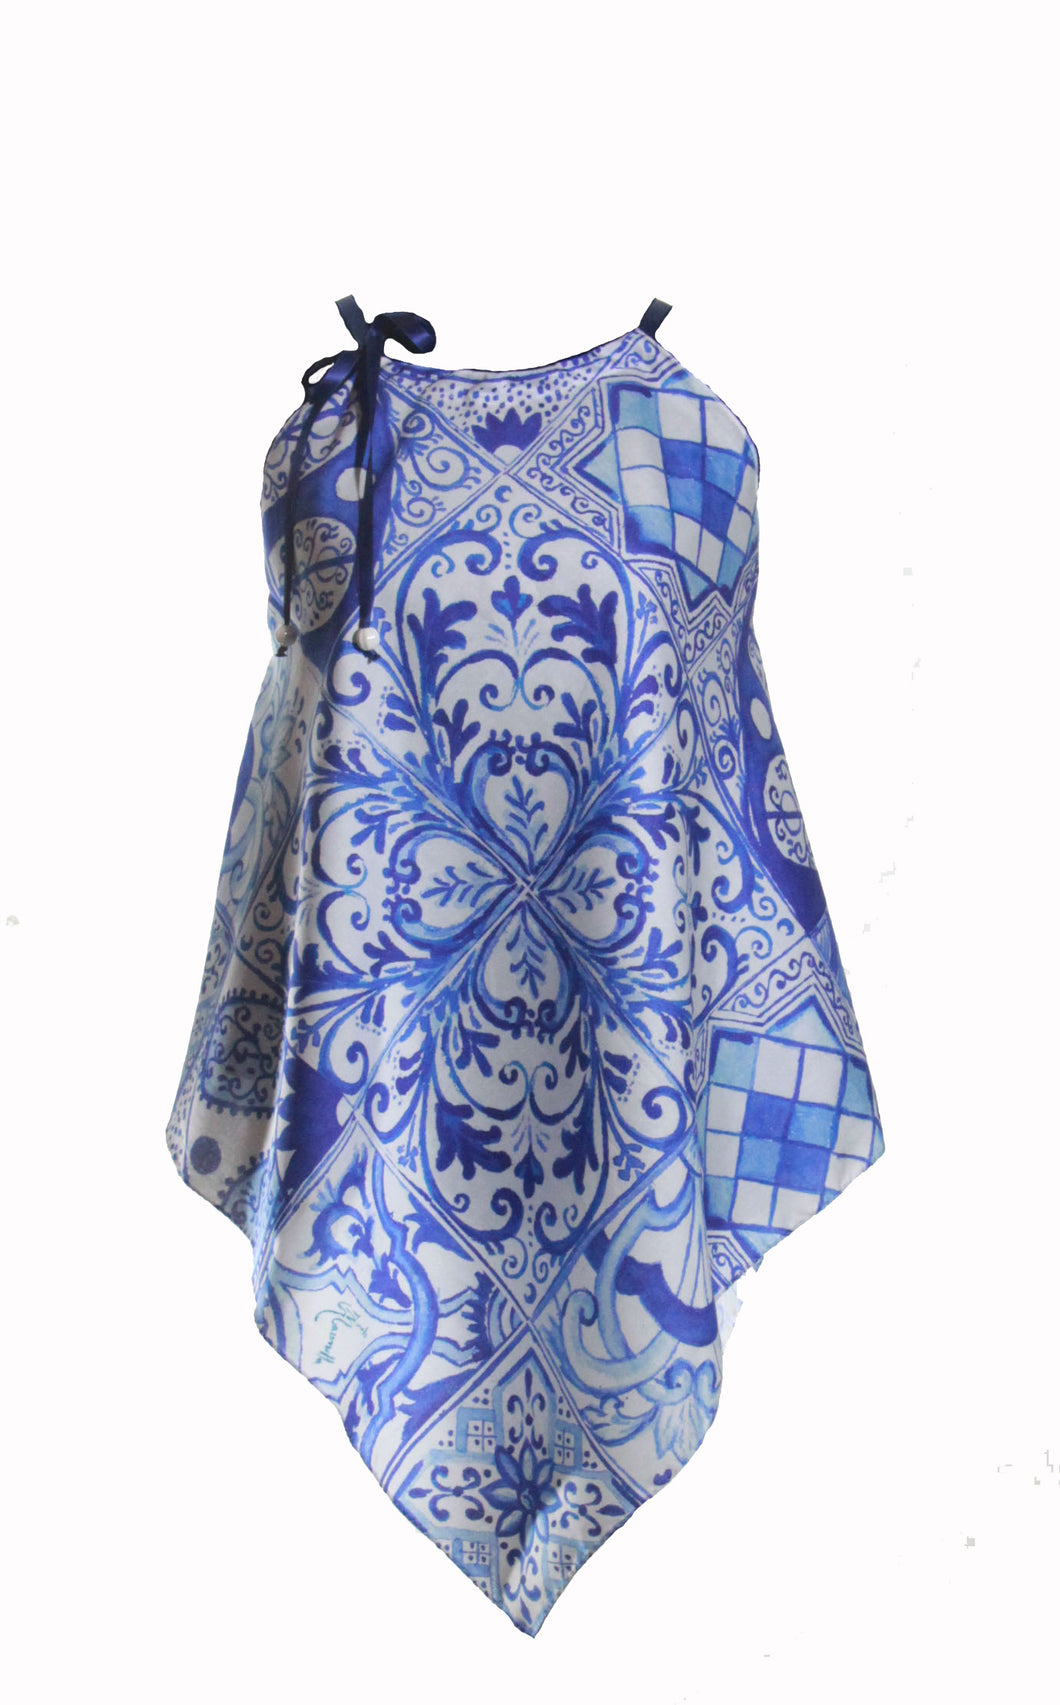 TOP FOR WOMAN WITH BLUE TILES IN 100% COTTON SATIN WITH ARTISTIC PRINTS THAT COME FROM PAINTINGS